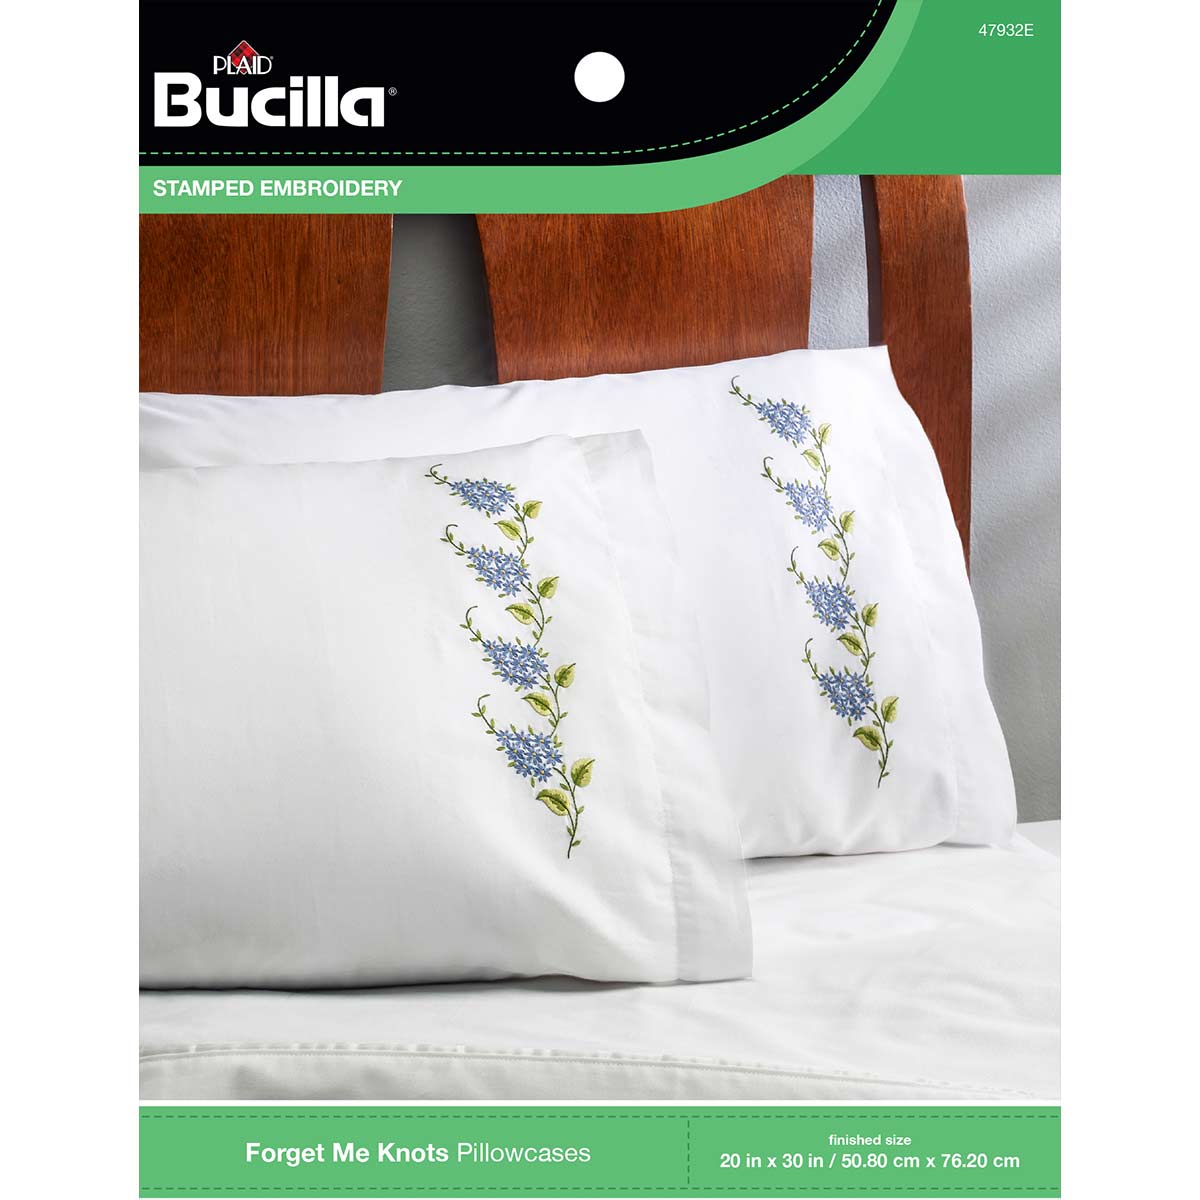 Bucilla ® Stamped Cross Stitch & Embroidery - Pillowcase Pairs - Forget Me Knots - 47932E